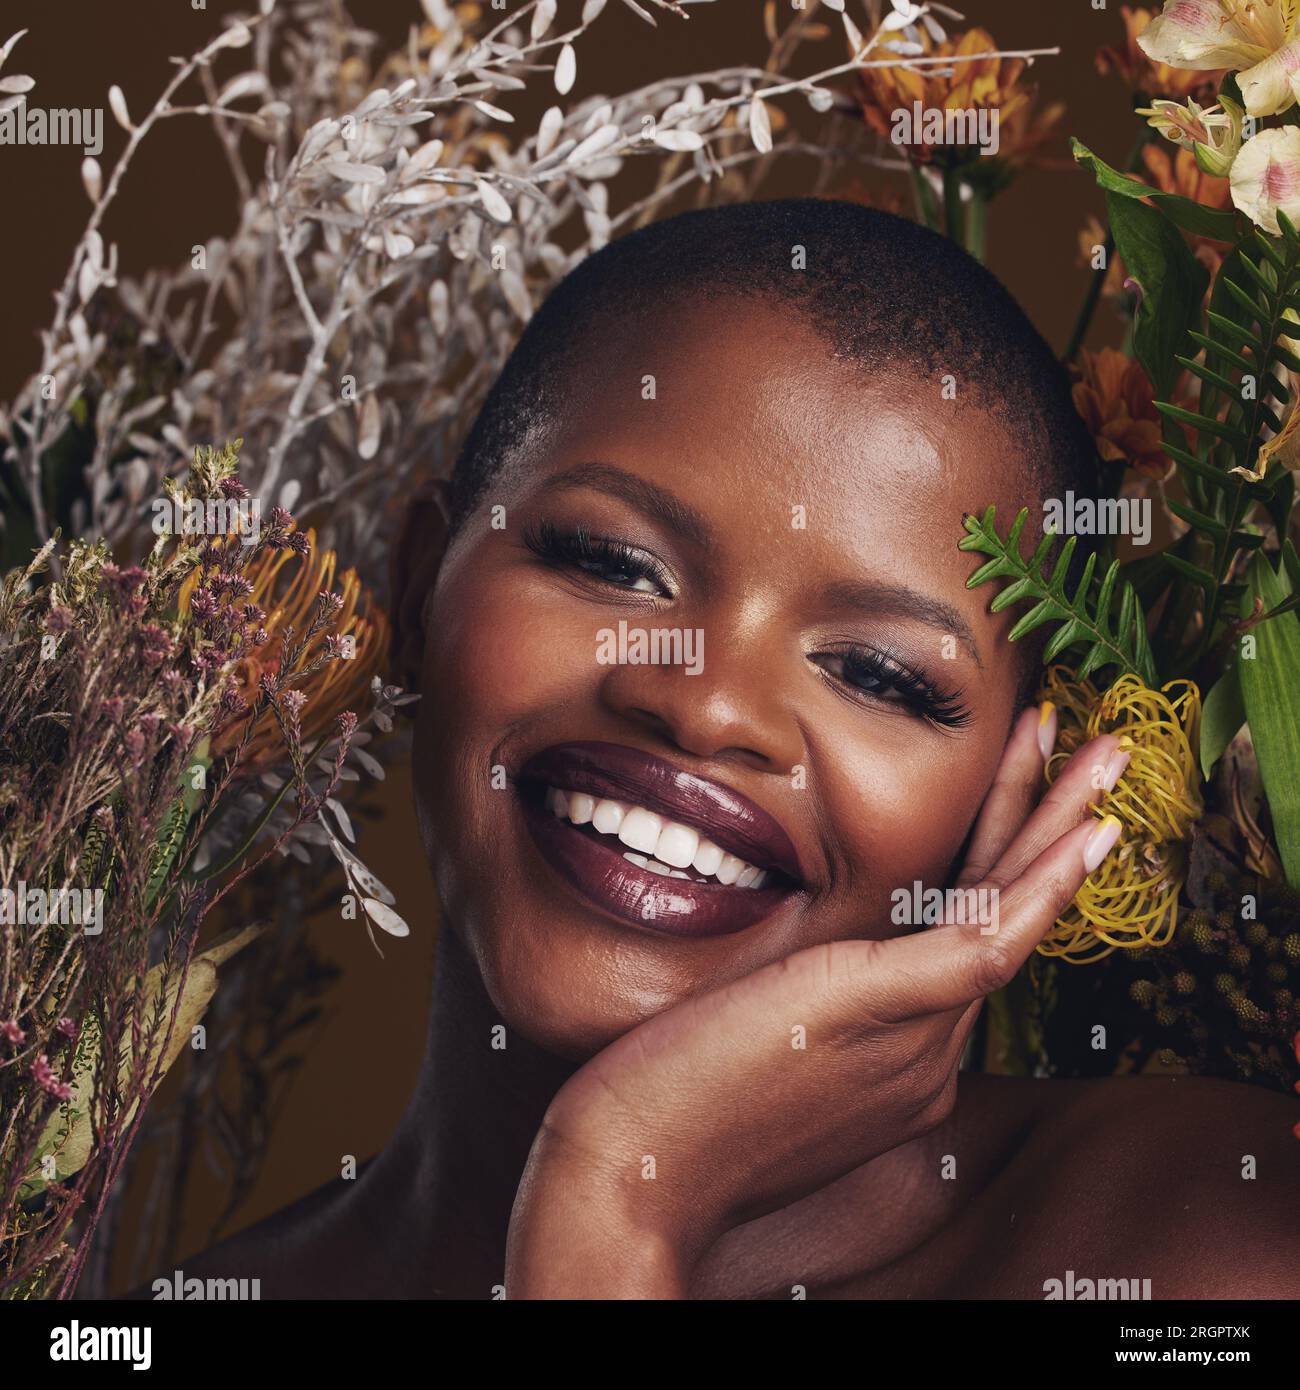 African woman, plants and makeup in studio portrait with beauty